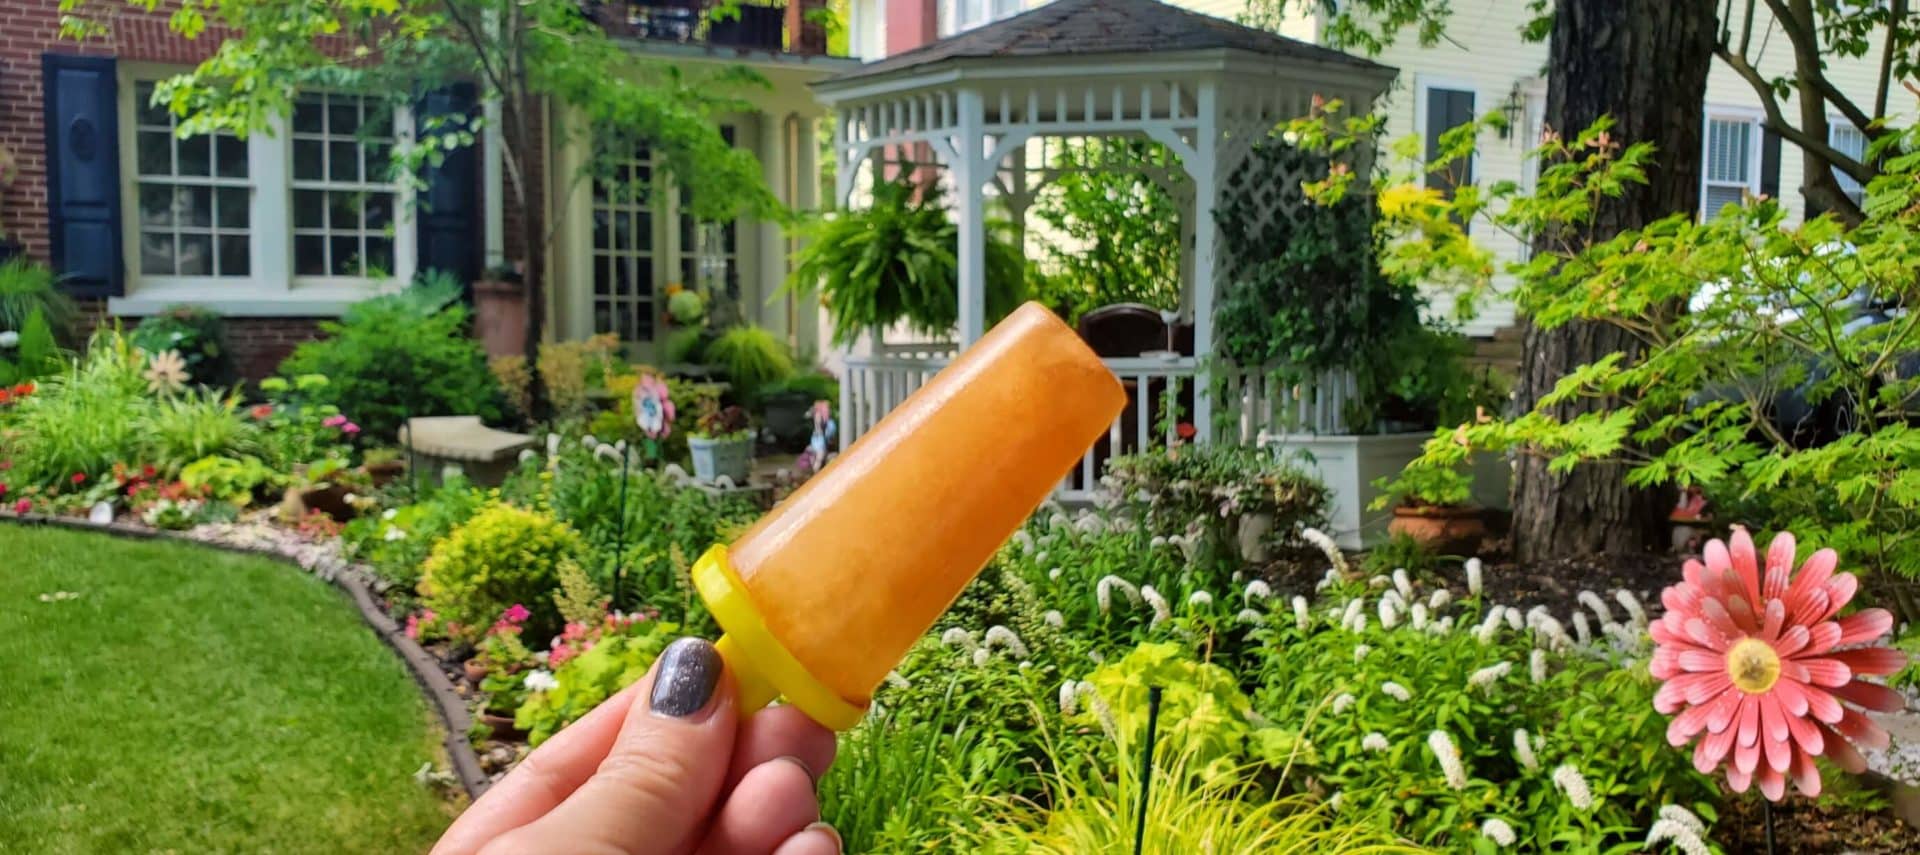 Peach tea popsicle with gazebo in the garden background.